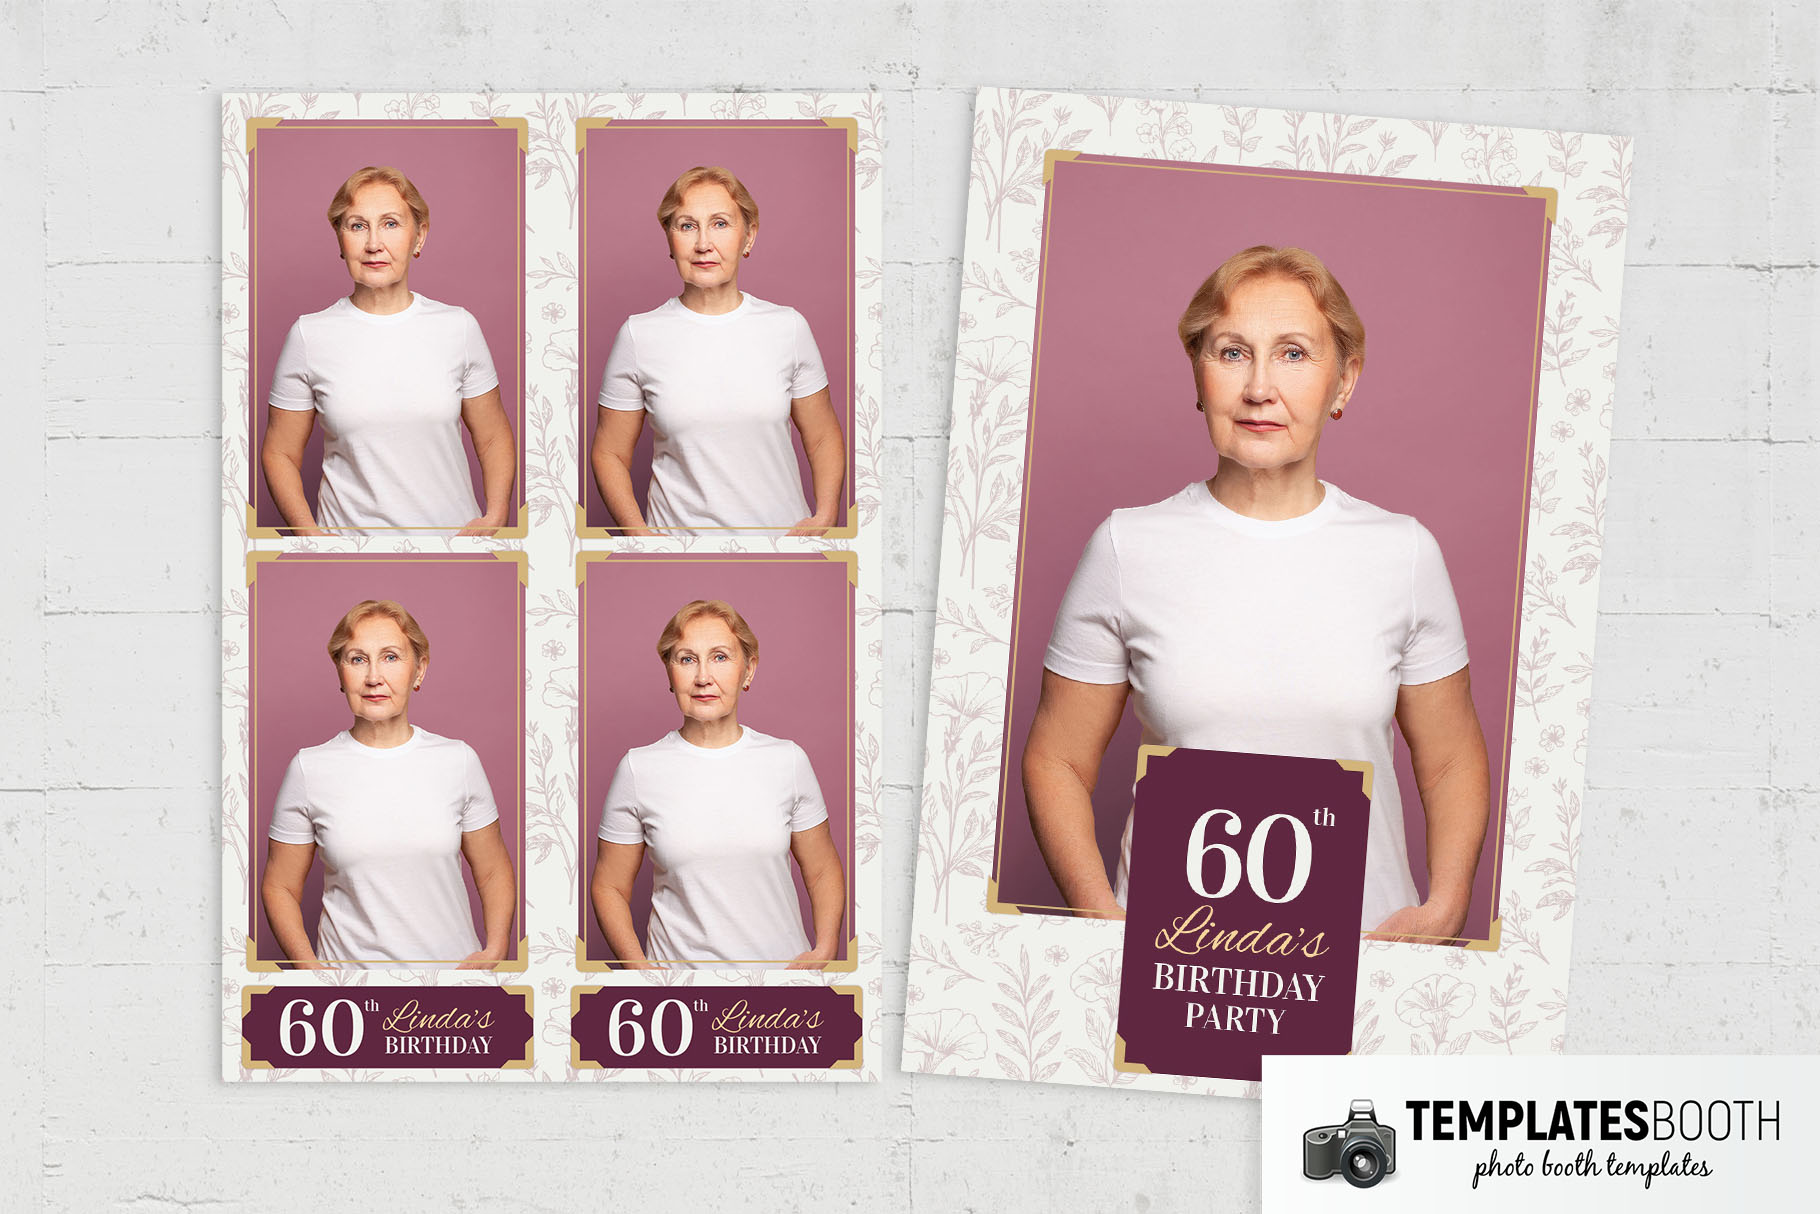 60th Birthday Photo Booth Template